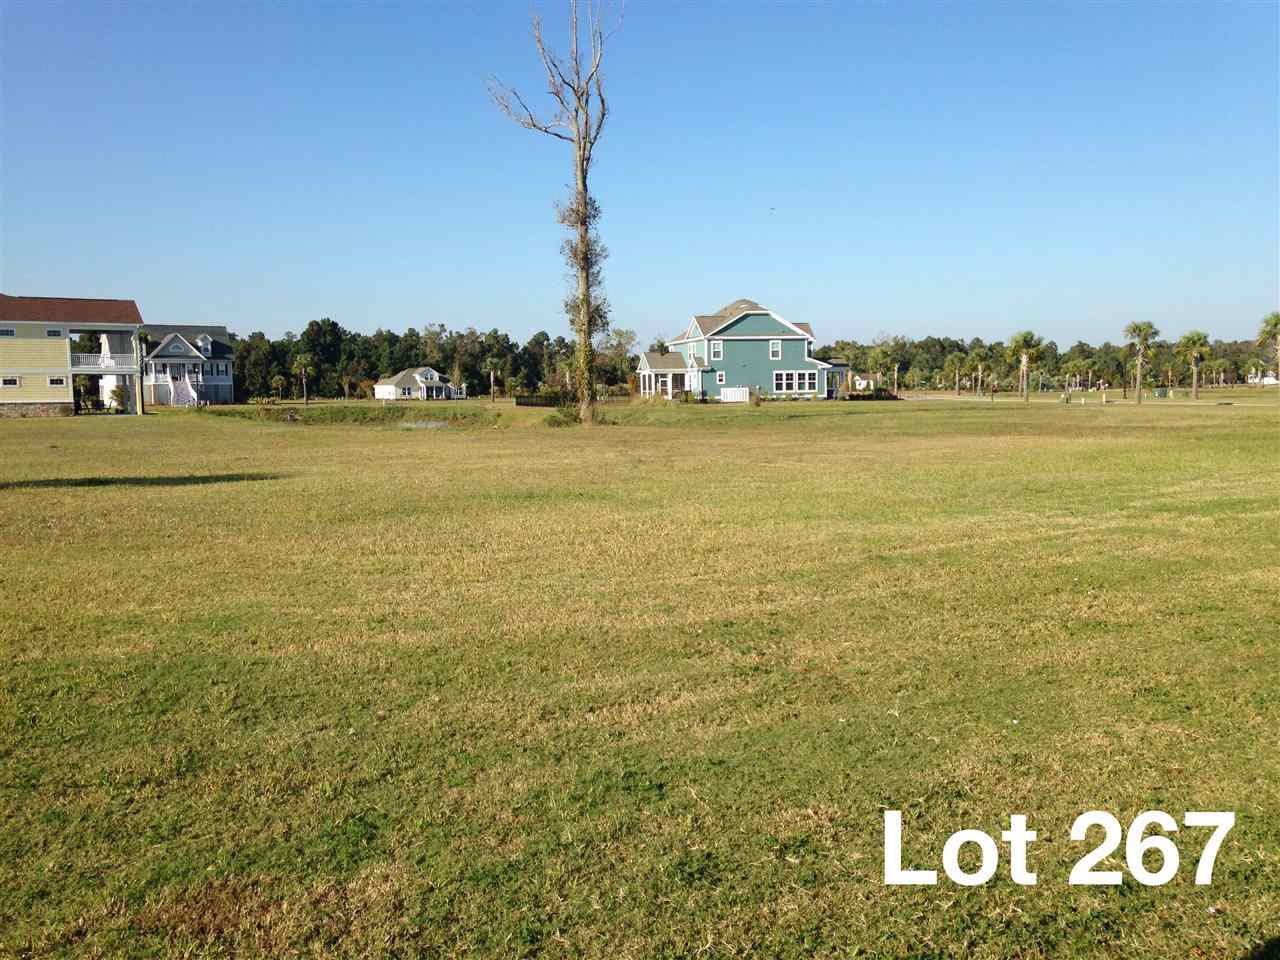 Lot 267 West Isle of Palms Ave. Myrtle Beach, SC 29579